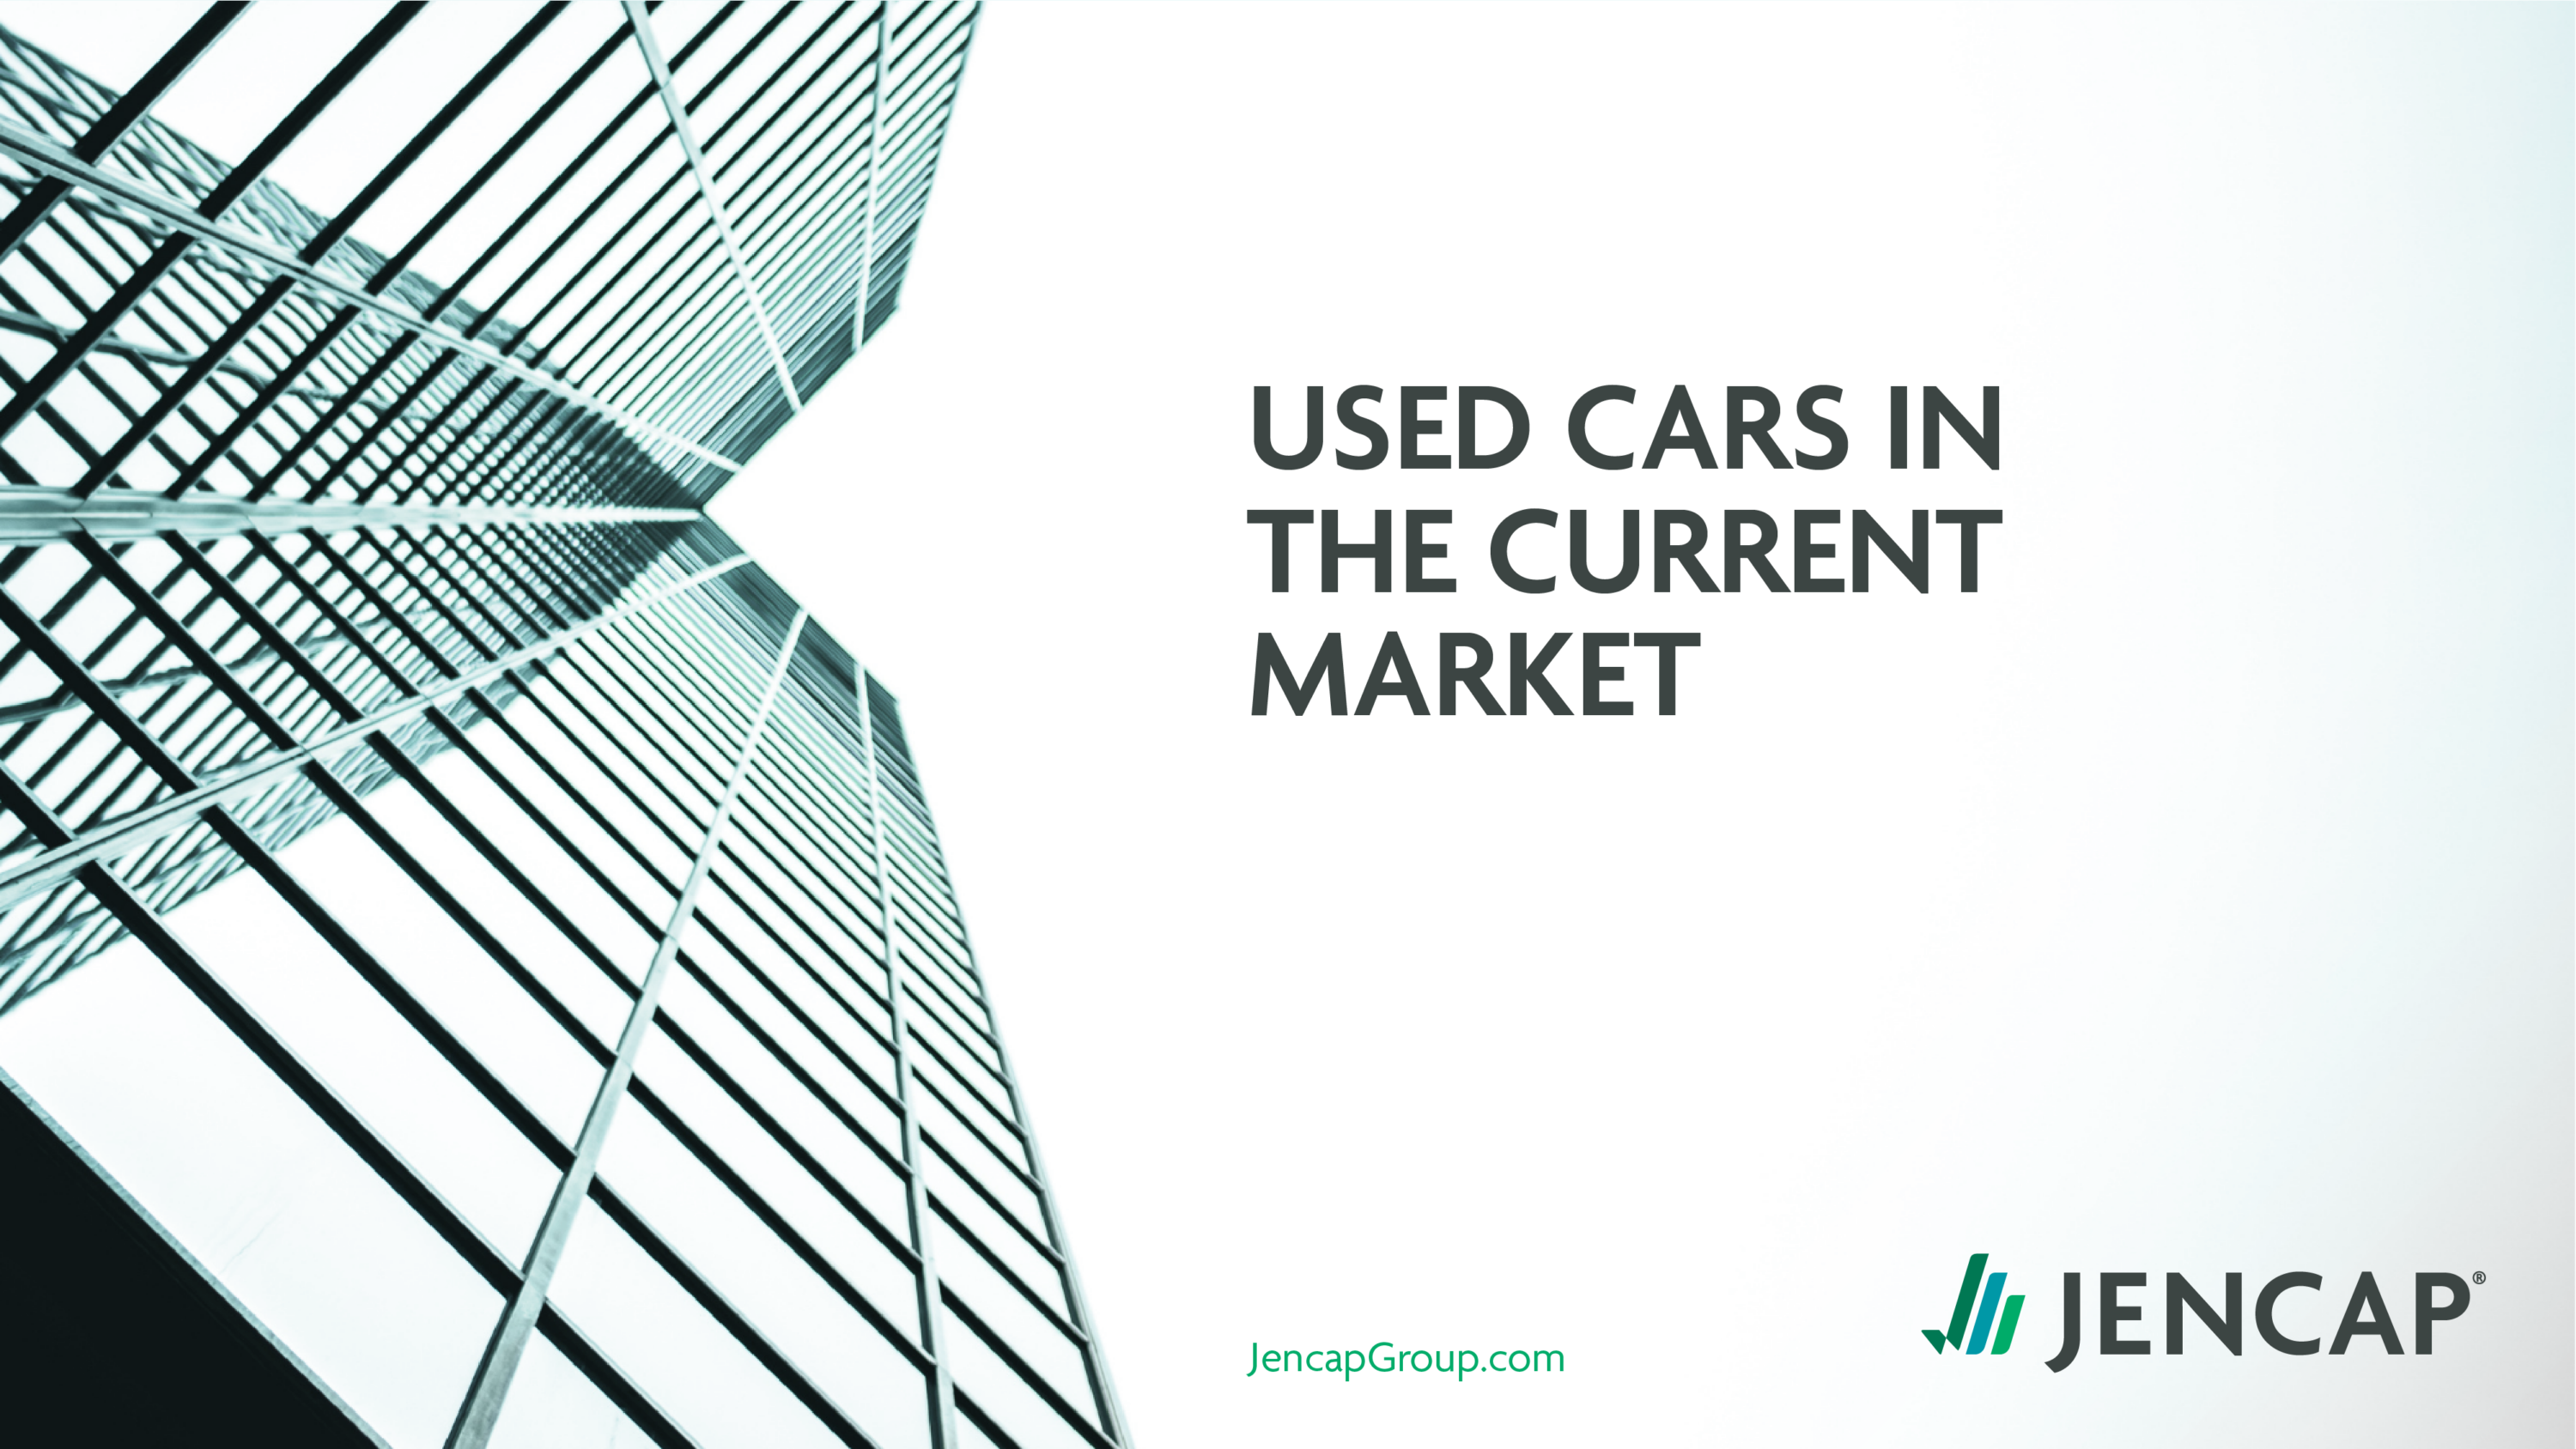 Used Cars in the Current Market